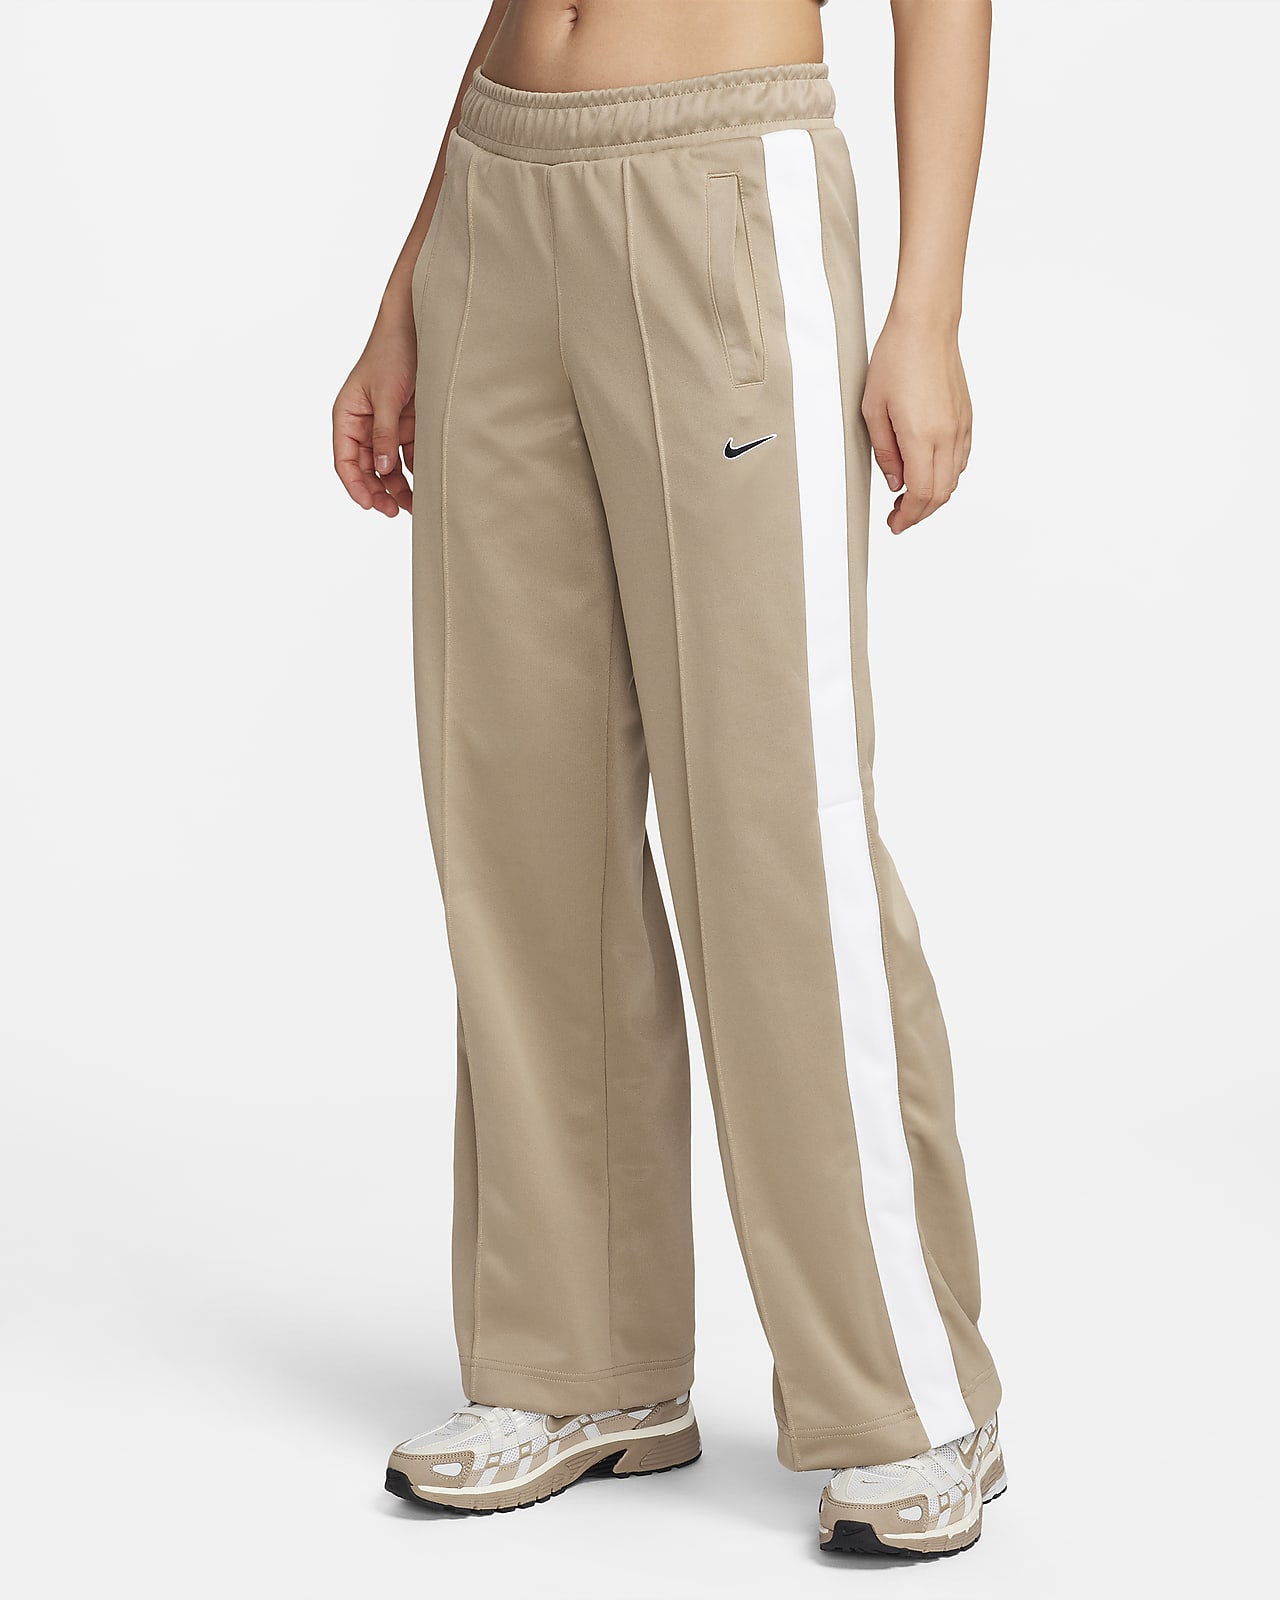 Women's Skinny Trousers, Explore our New Arrivals